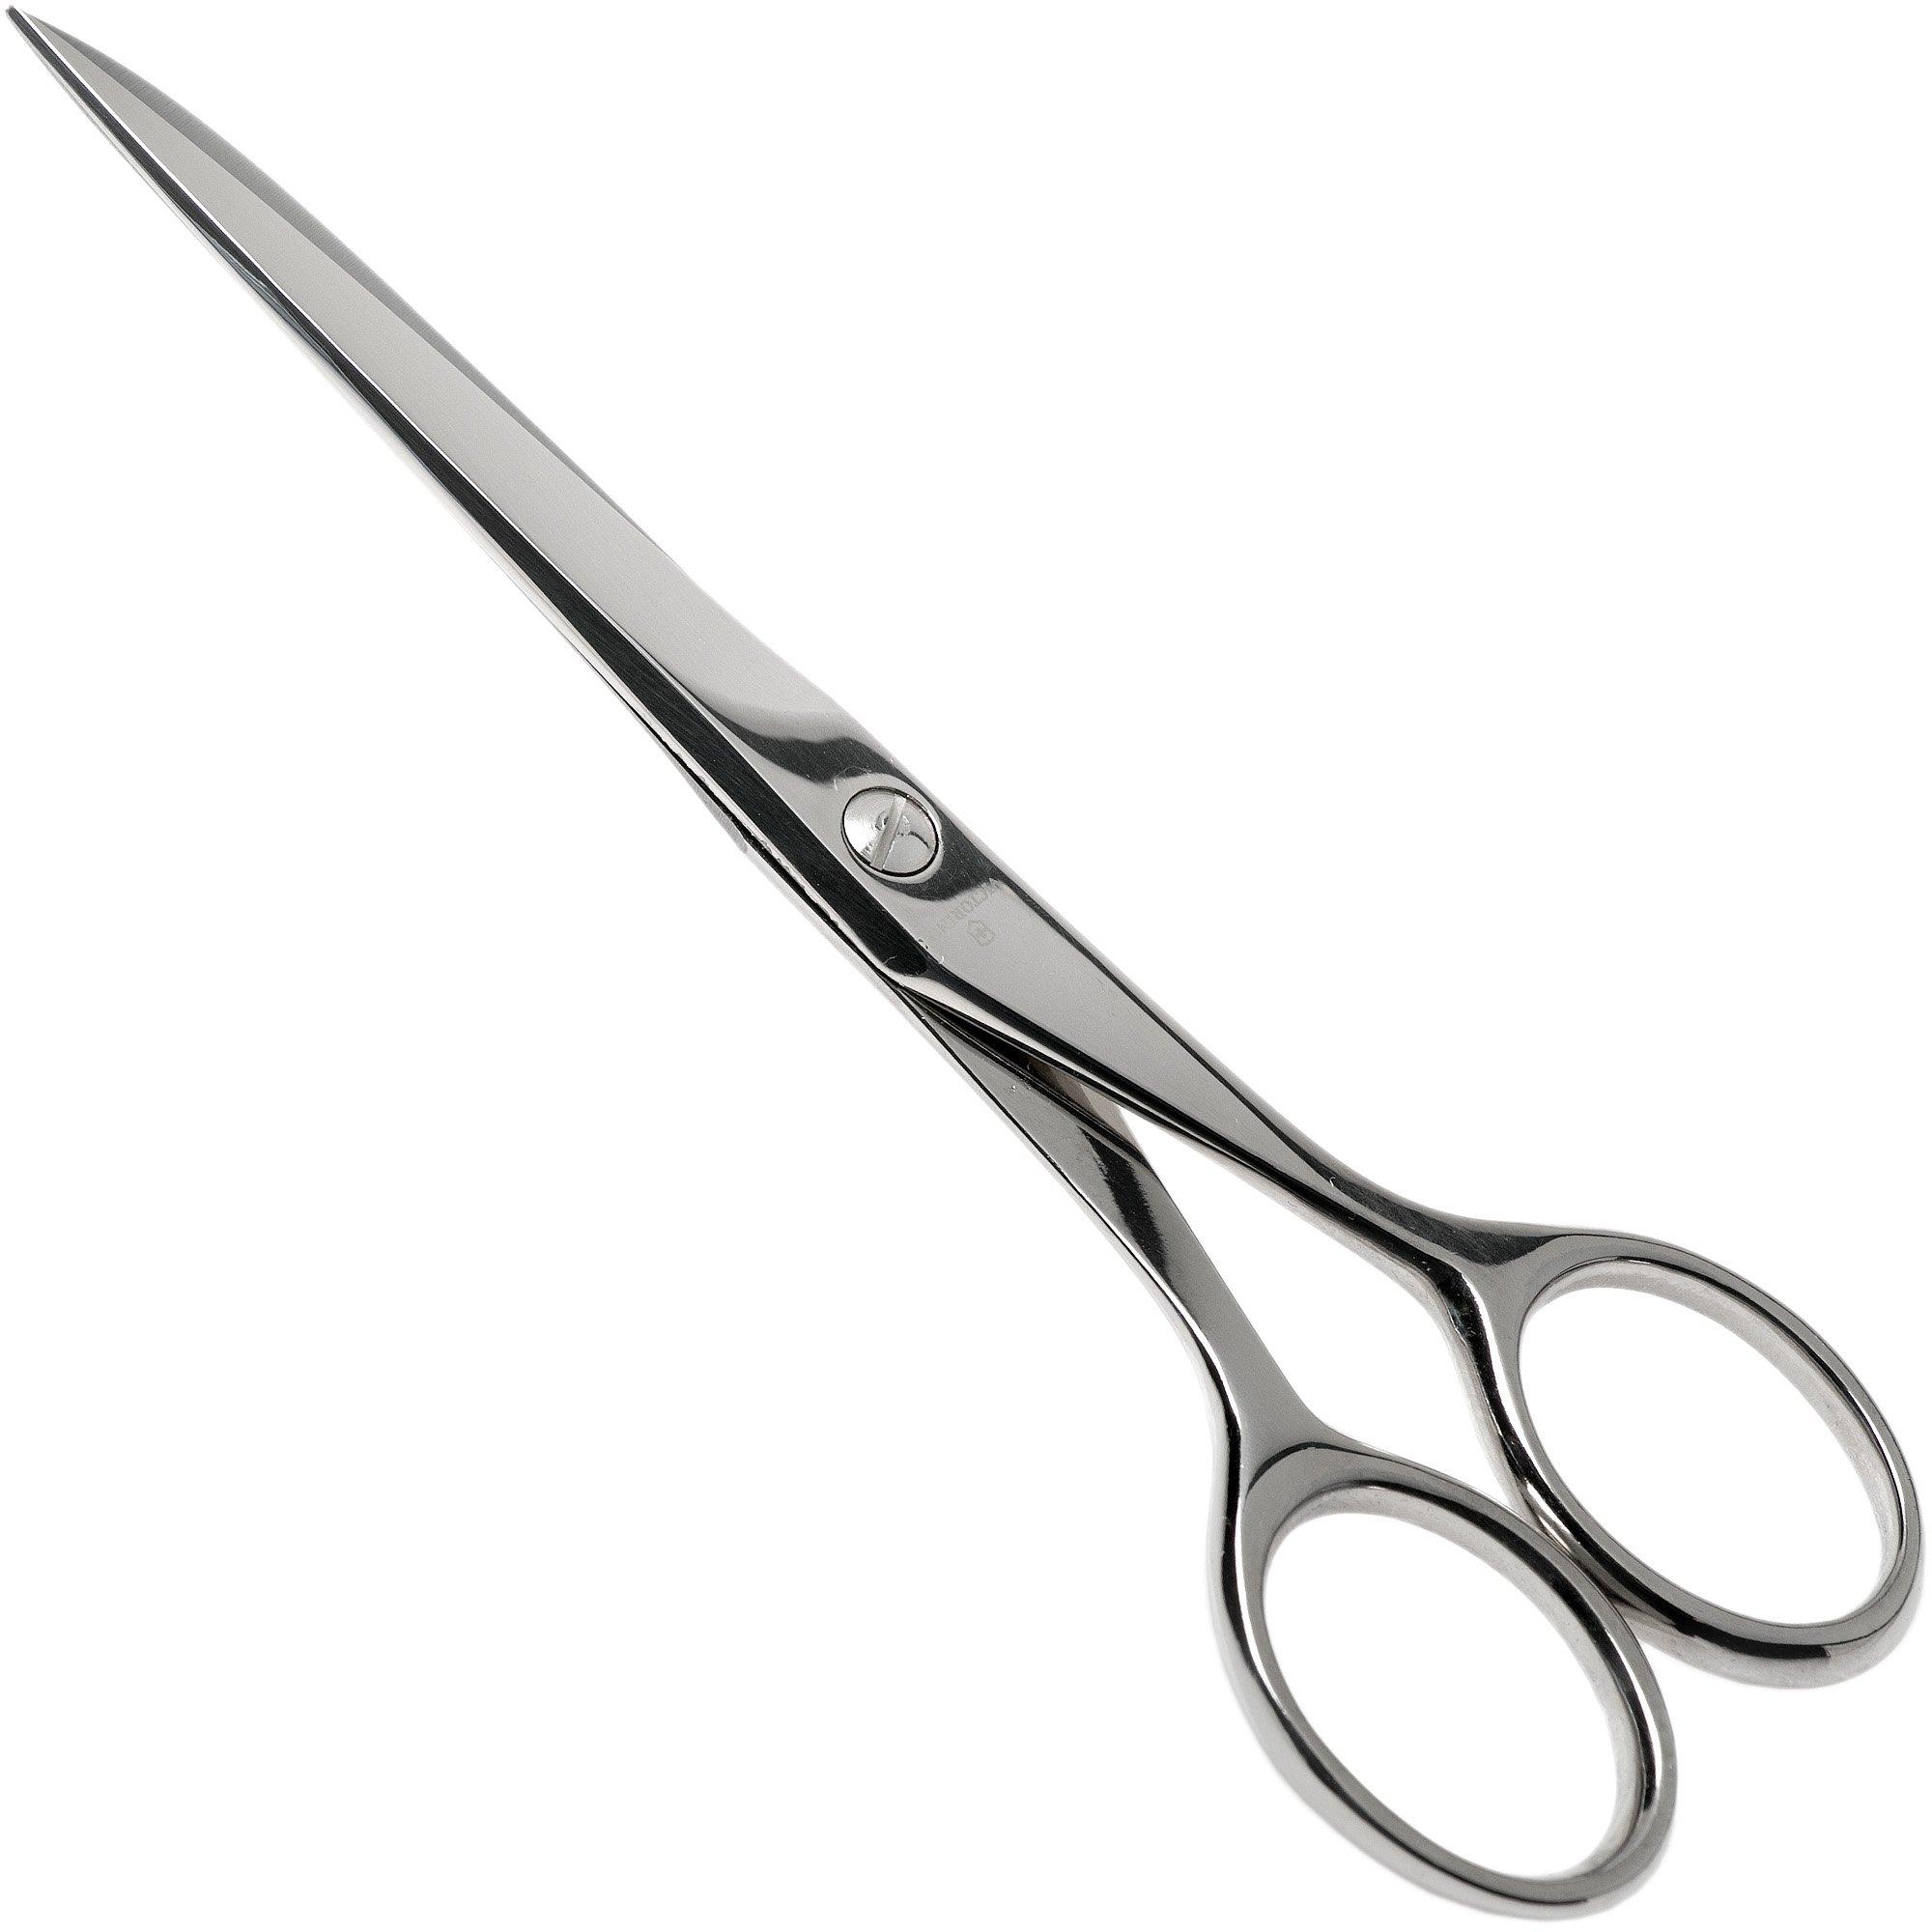 Victorinox Sweden 8.1016.15, 15 cm scissors household shopping | at Advantageously